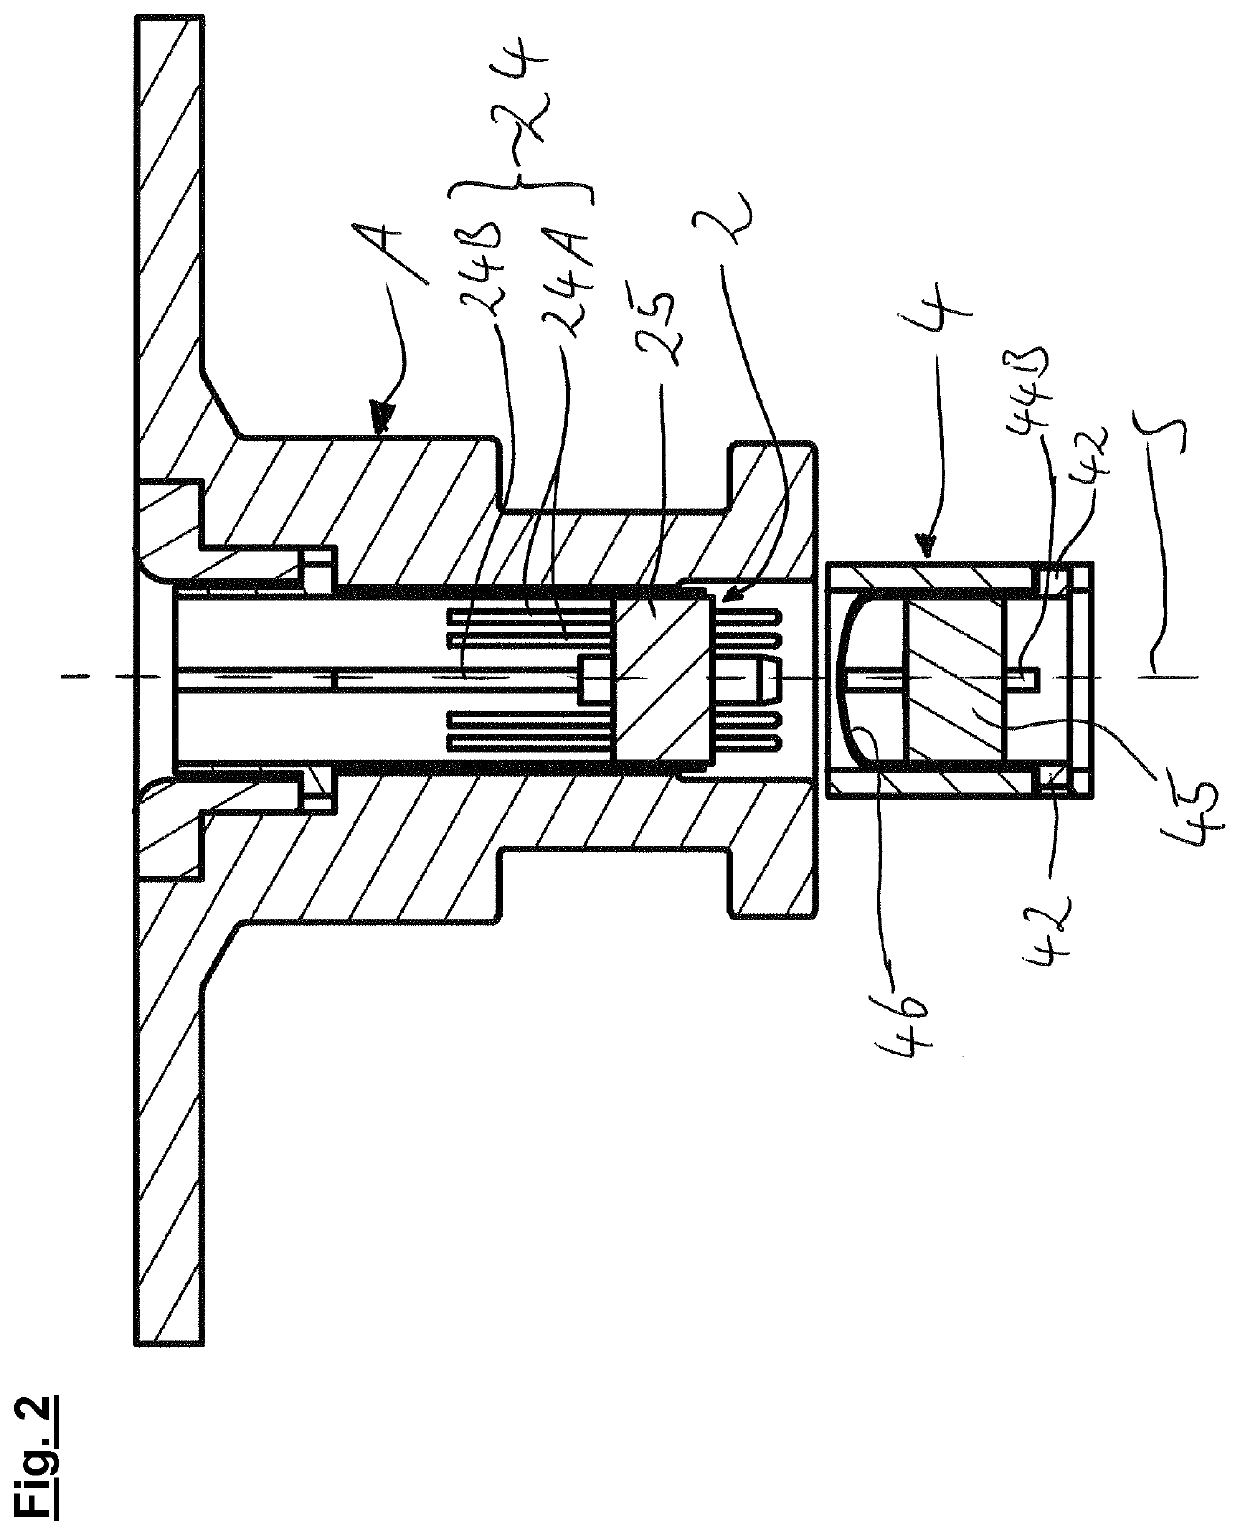 Coupling system